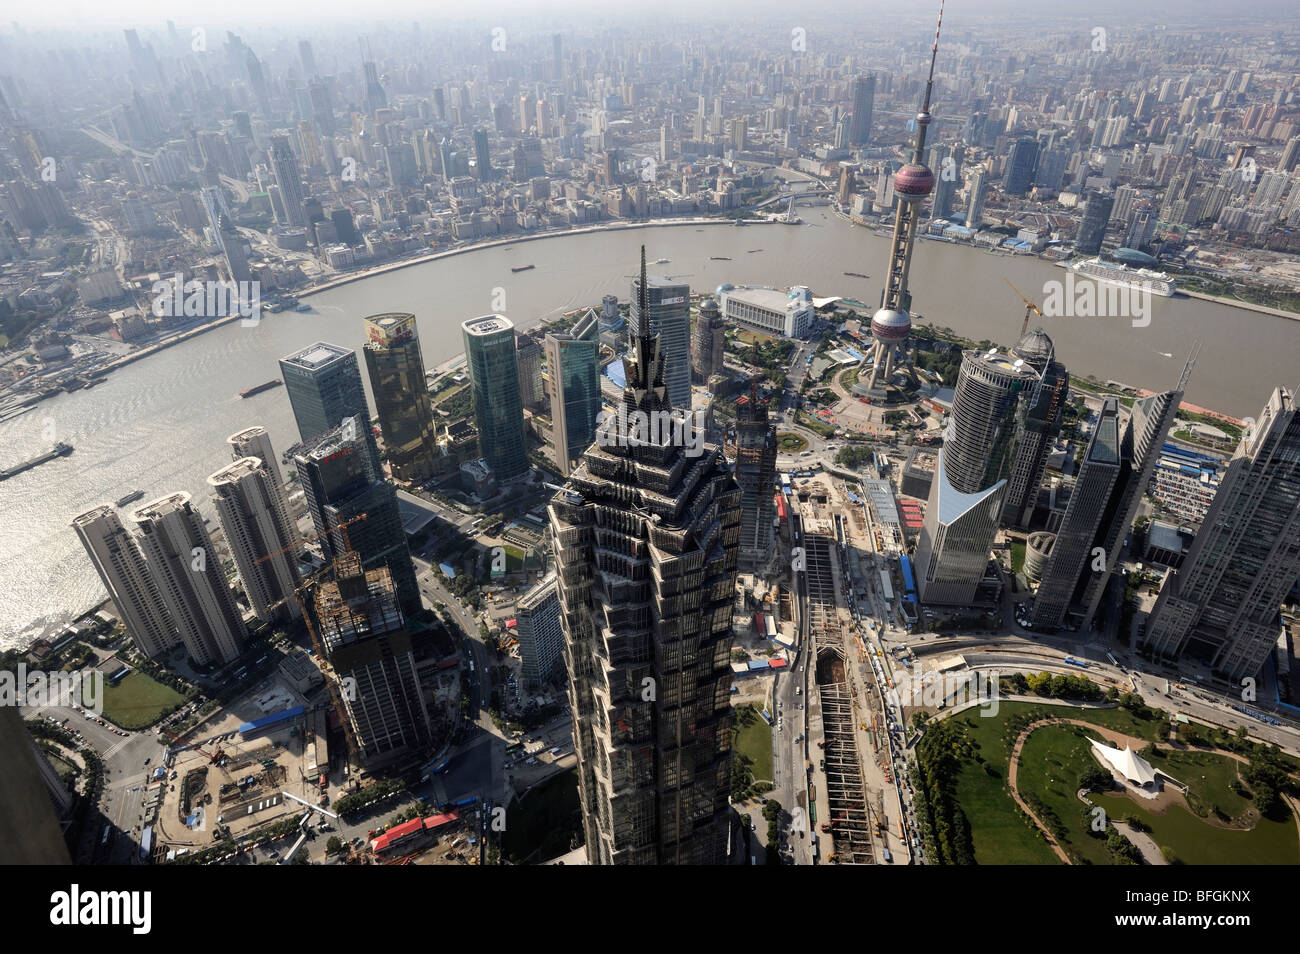 Skyline of Pudong commercial district, Shanghai, China. 14-Oct-2009 Stock Photo